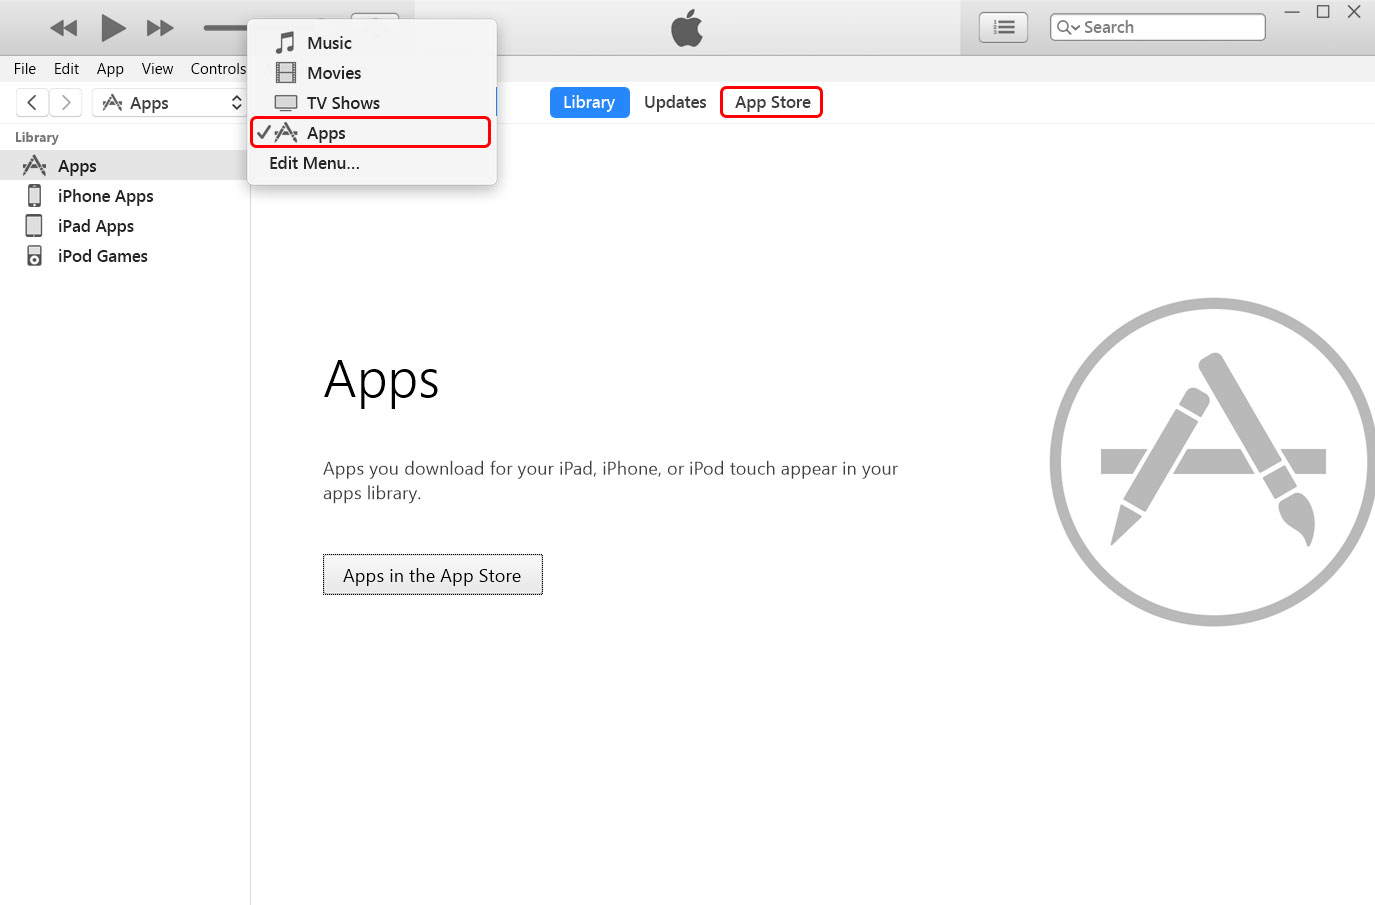 Access to the App Store through iTunes